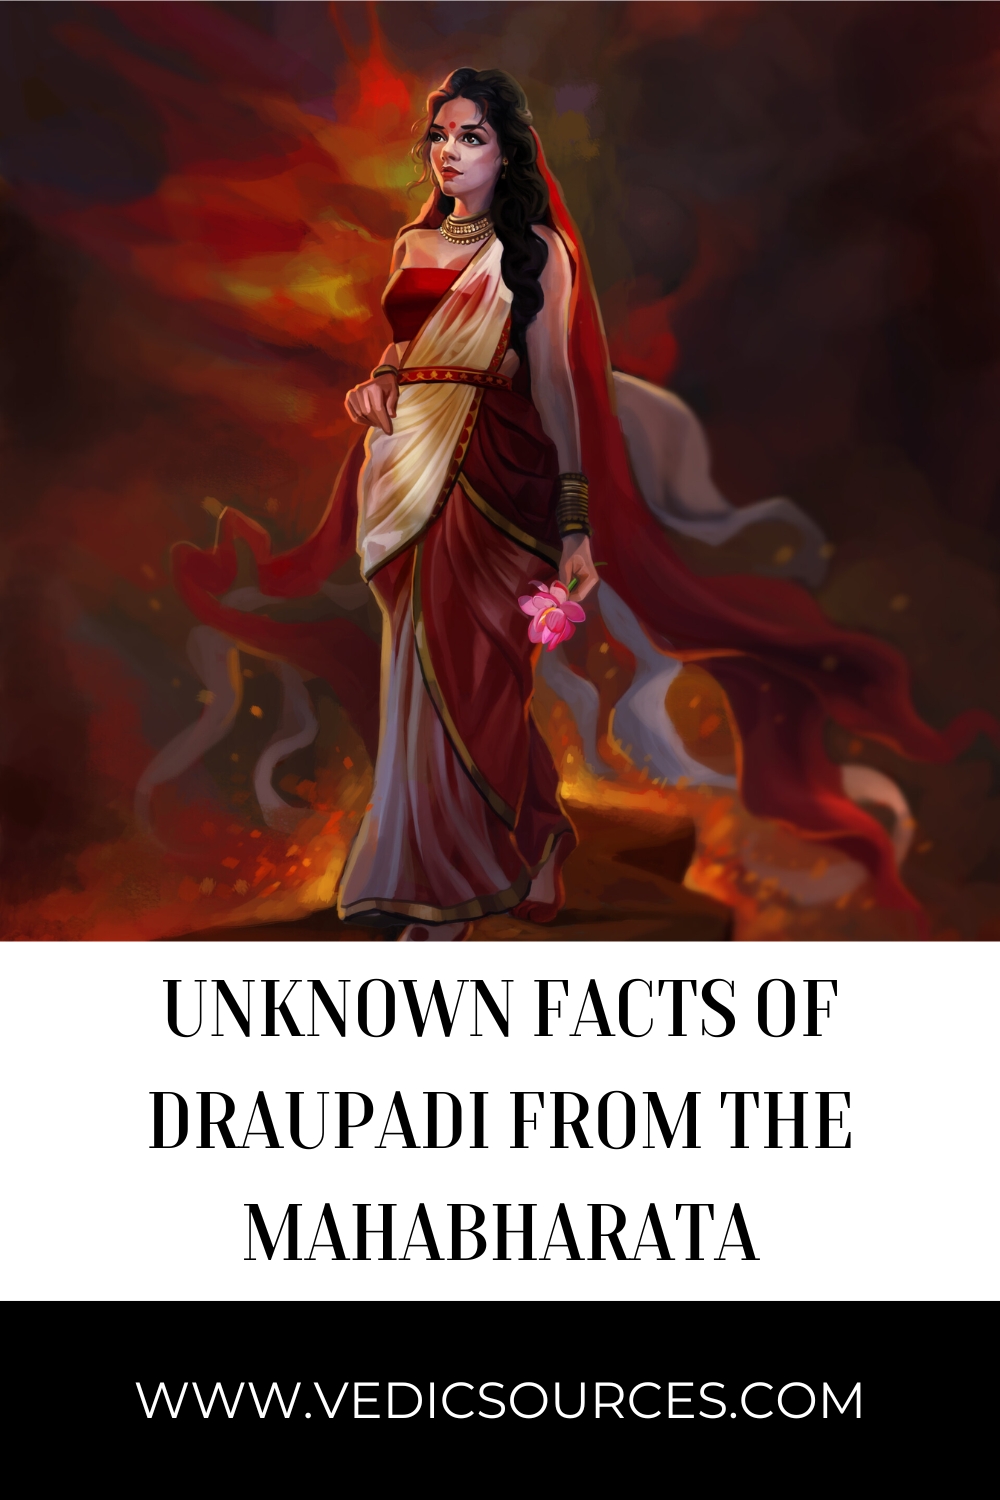 Unknown Facts of Draupadi from Mahabharat